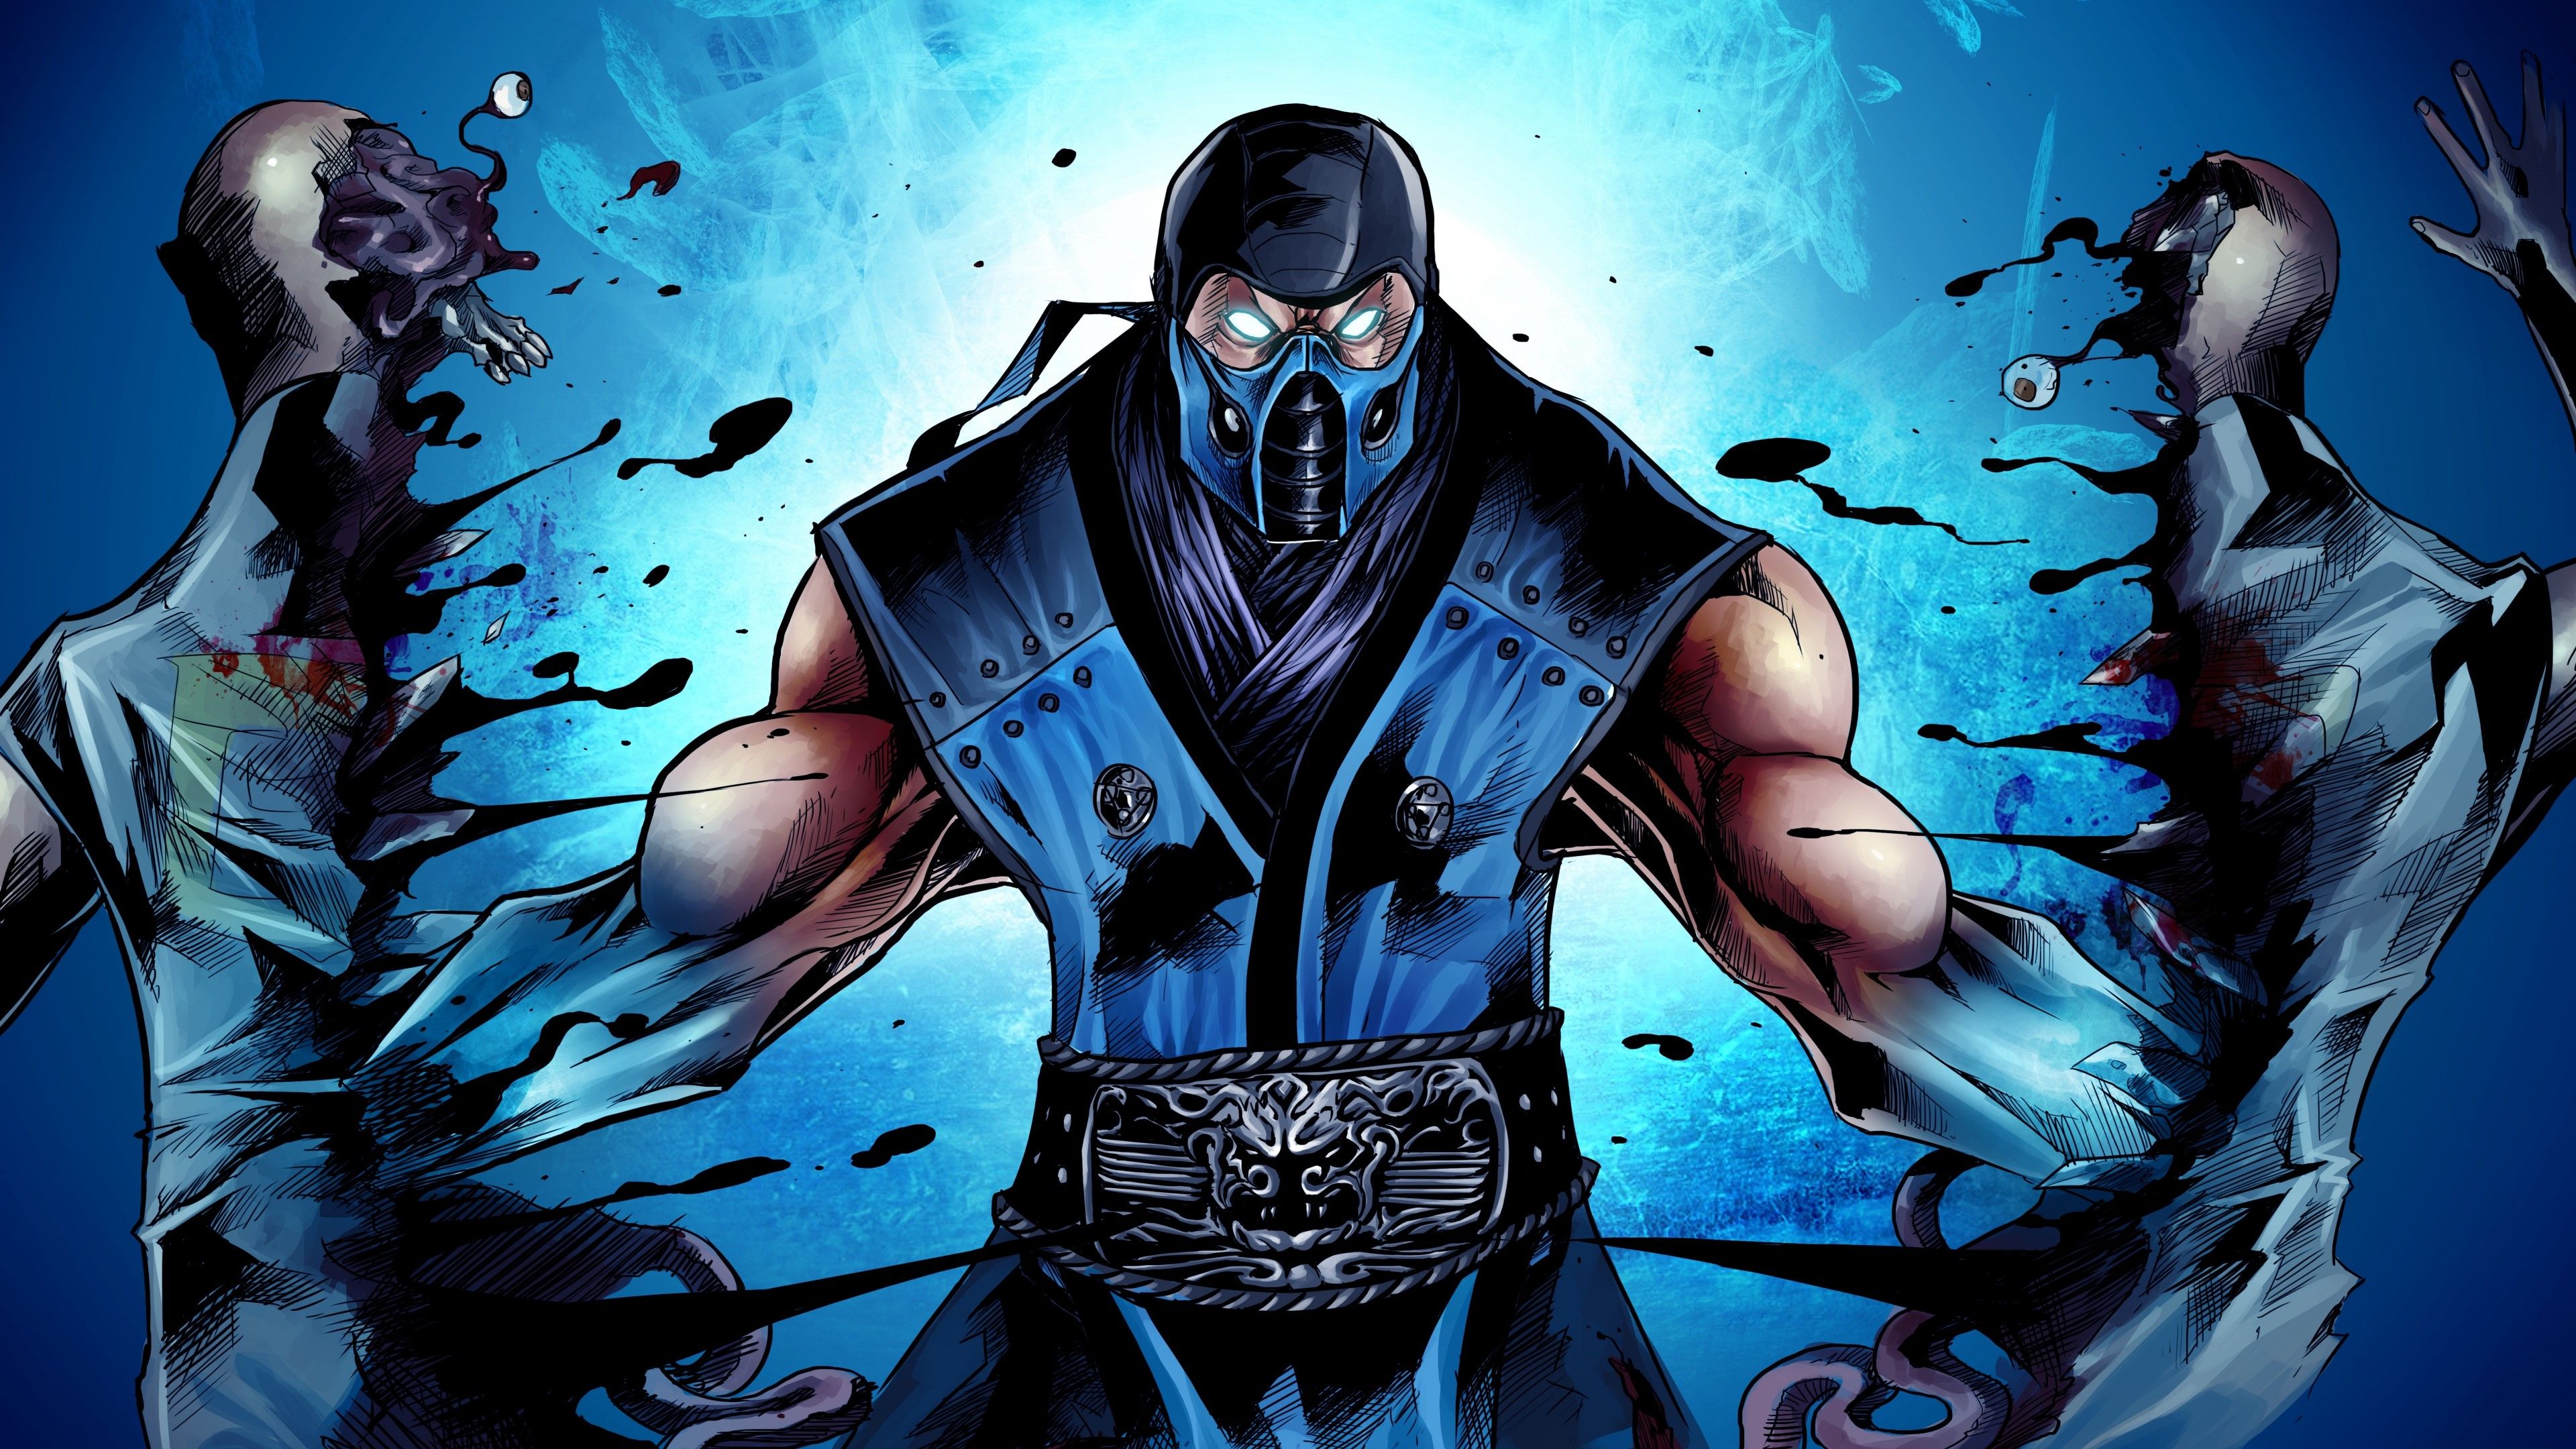 Kombat 4K wallpaper for your desktop or mobile screen free and easy to download